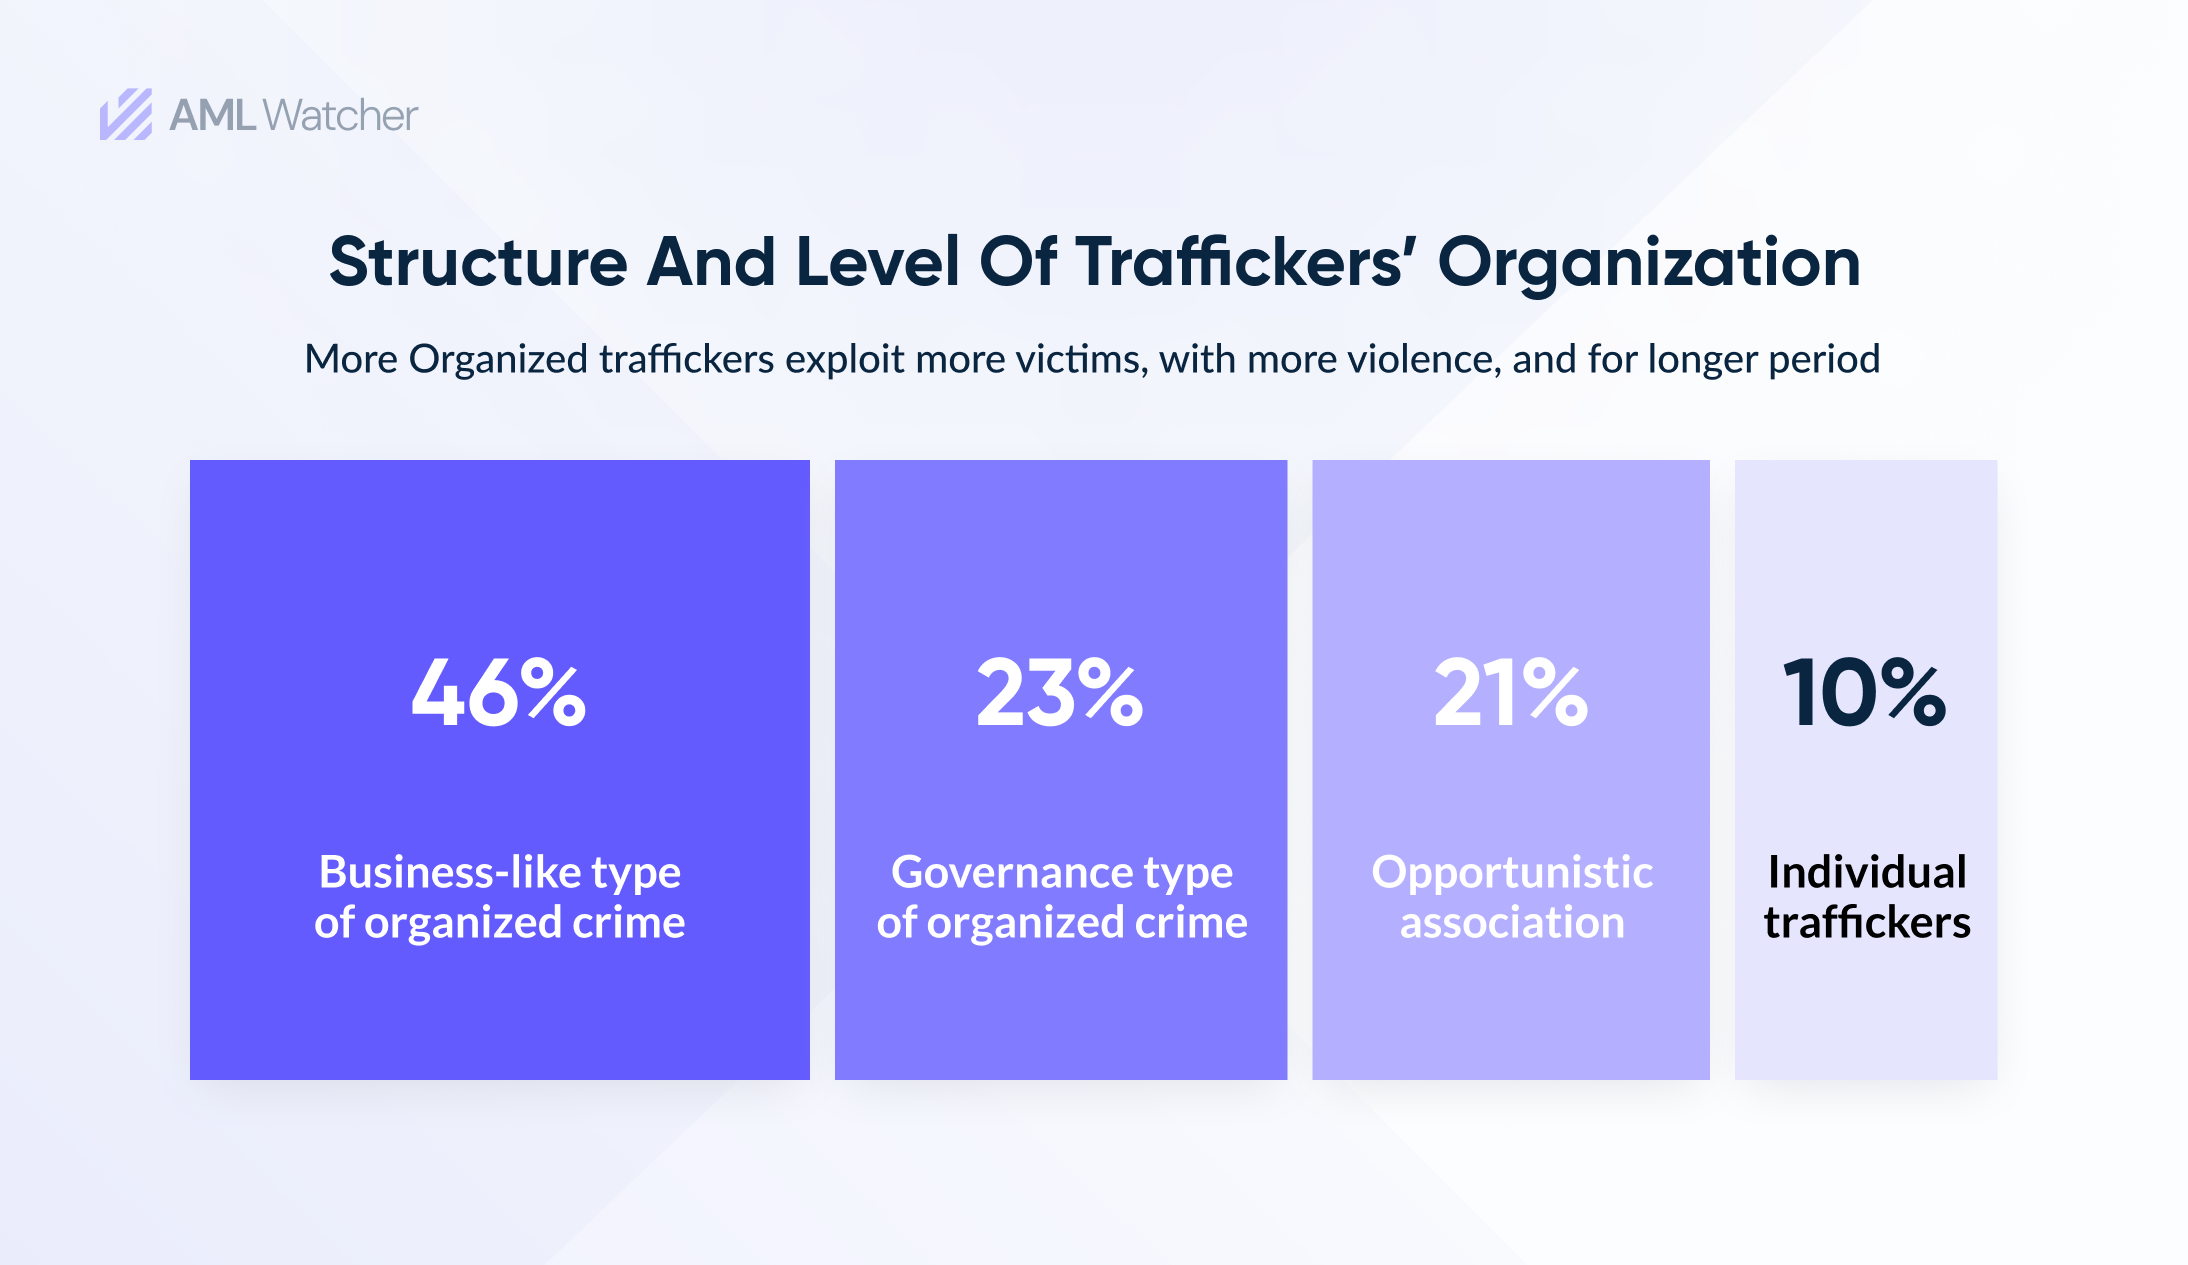 This image shows the Structure and level of traffickers’ organization identified by the United Nations Global Report on Trafficking in Persons 2022